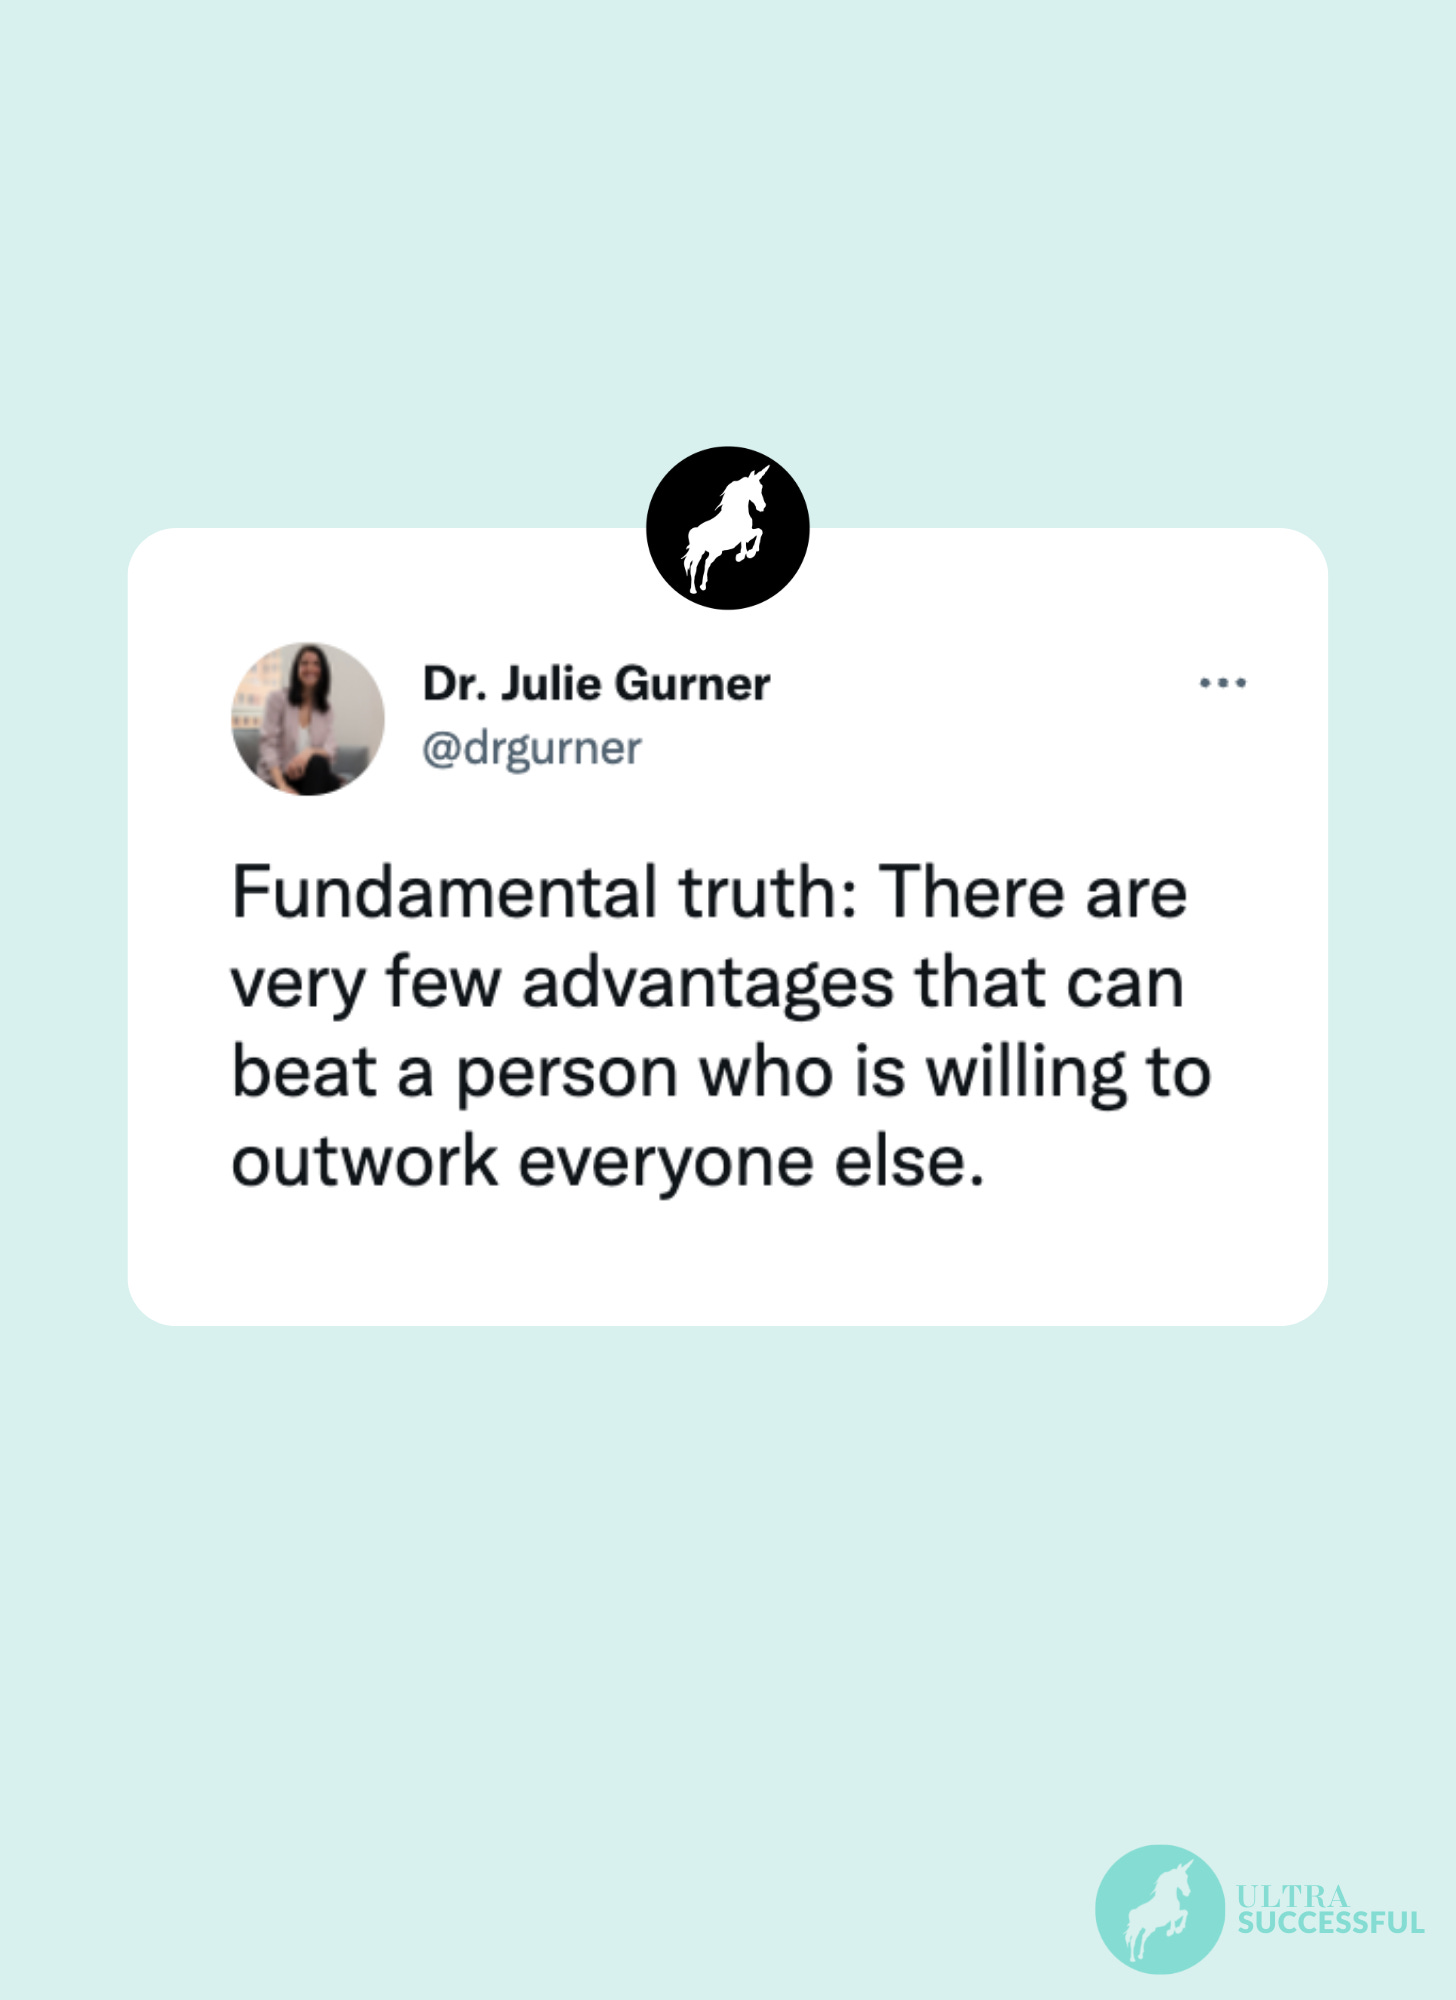 @drgurner: Fundamental truth: There are very few advantages that can beat a person who is willing to outwork everyone else.